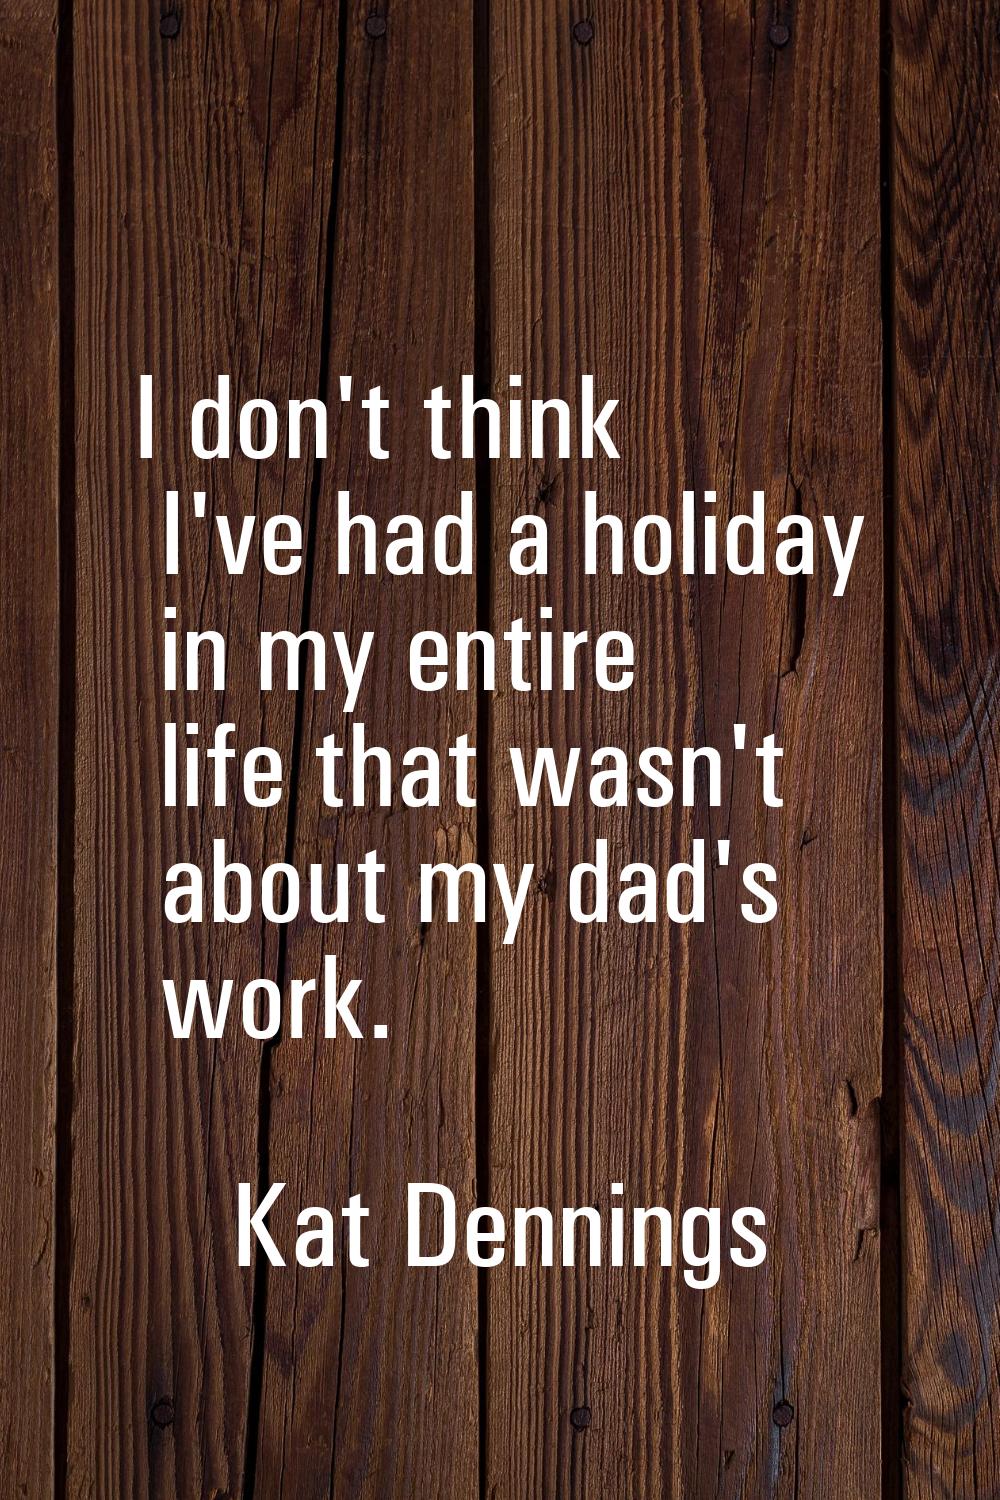 I don't think I've had a holiday in my entire life that wasn't about my dad's work.